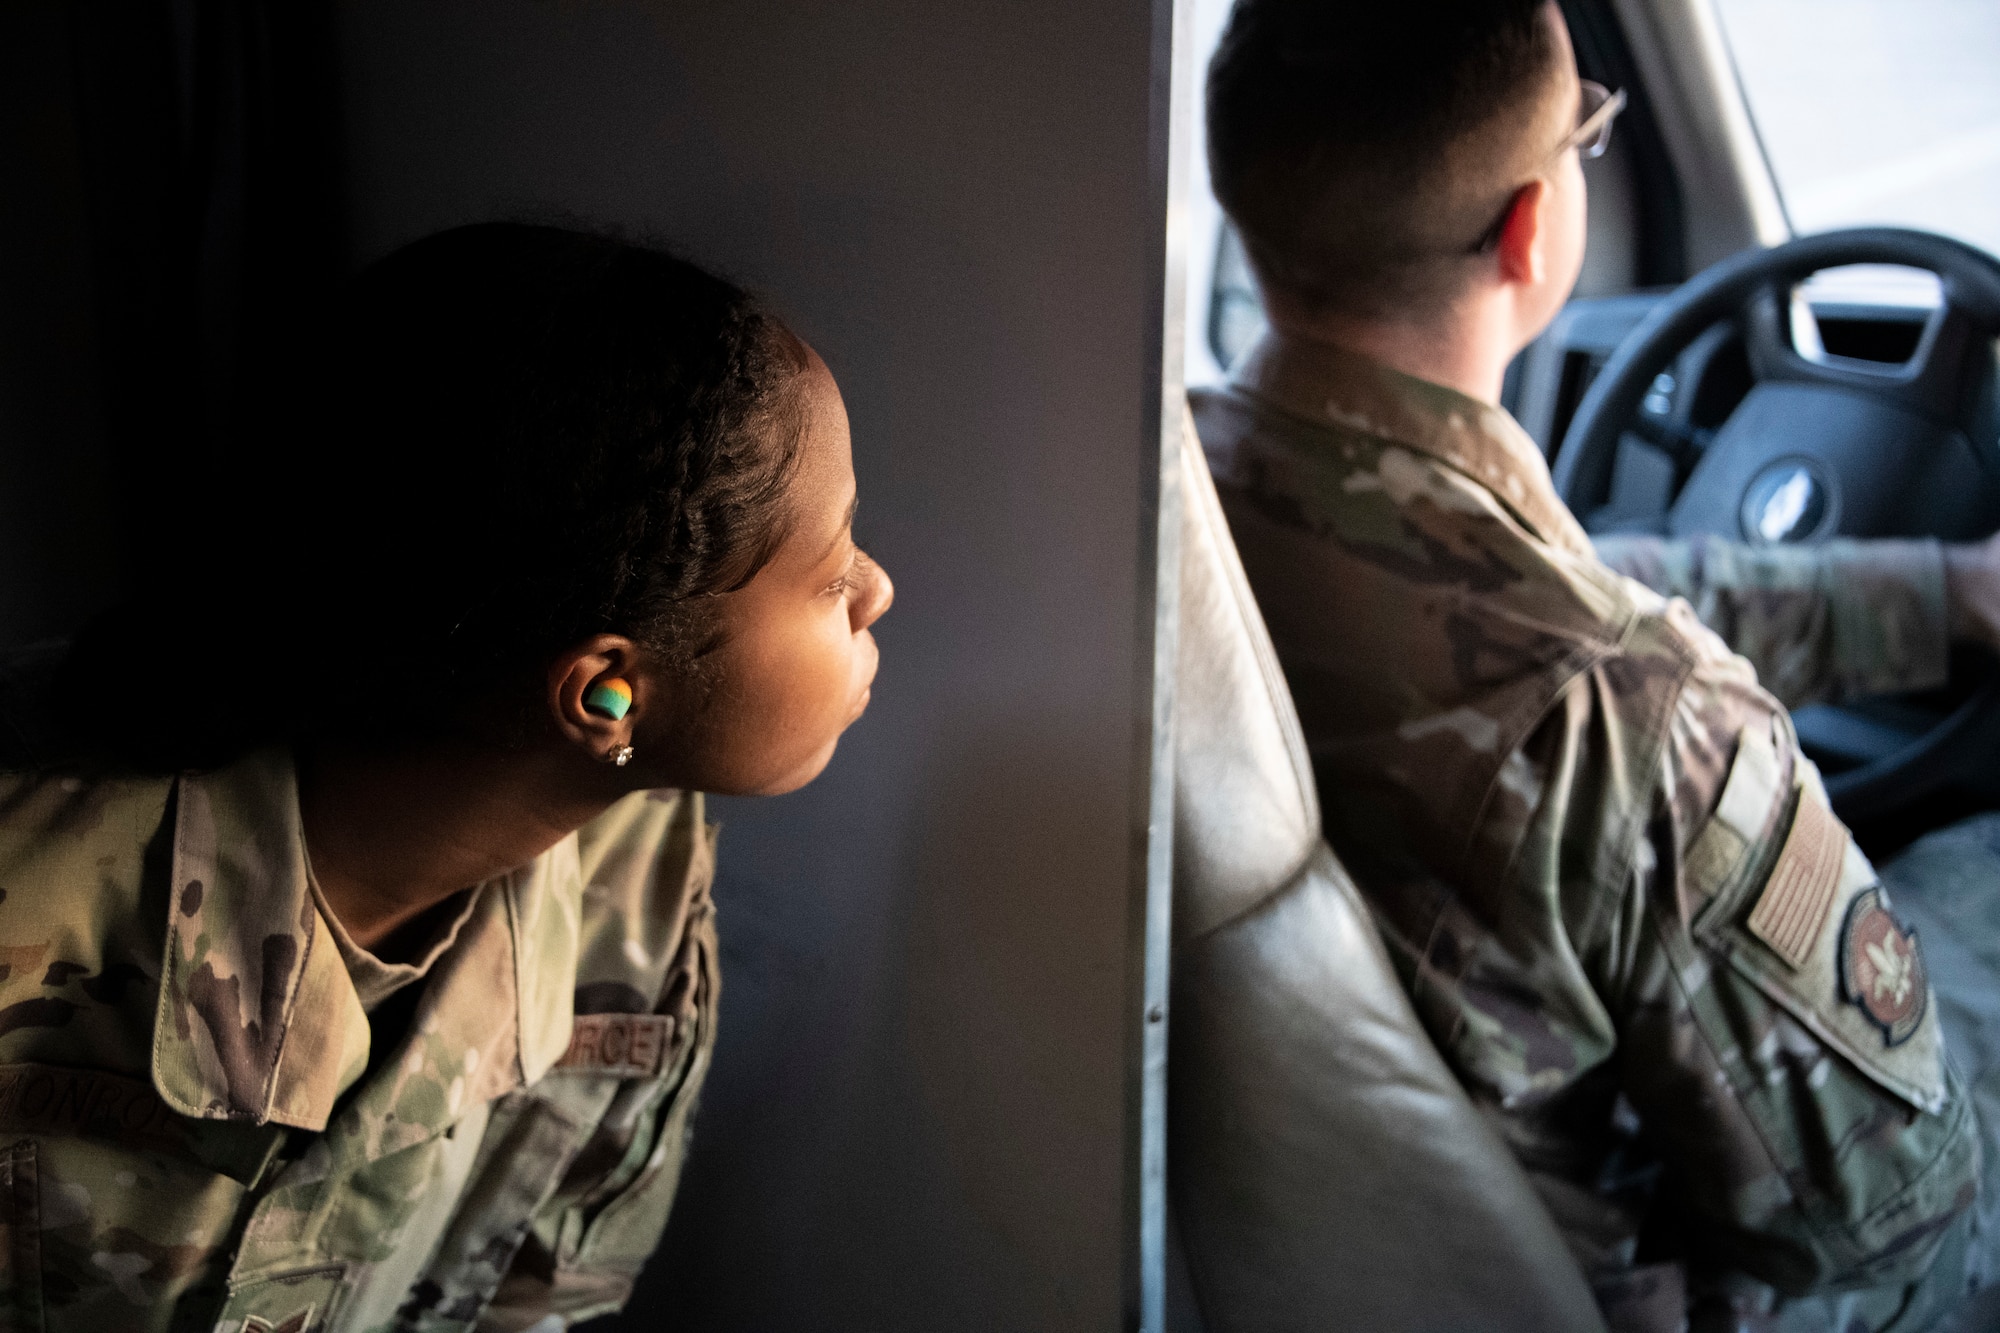 Photo of Airman looking out window of vehicle.